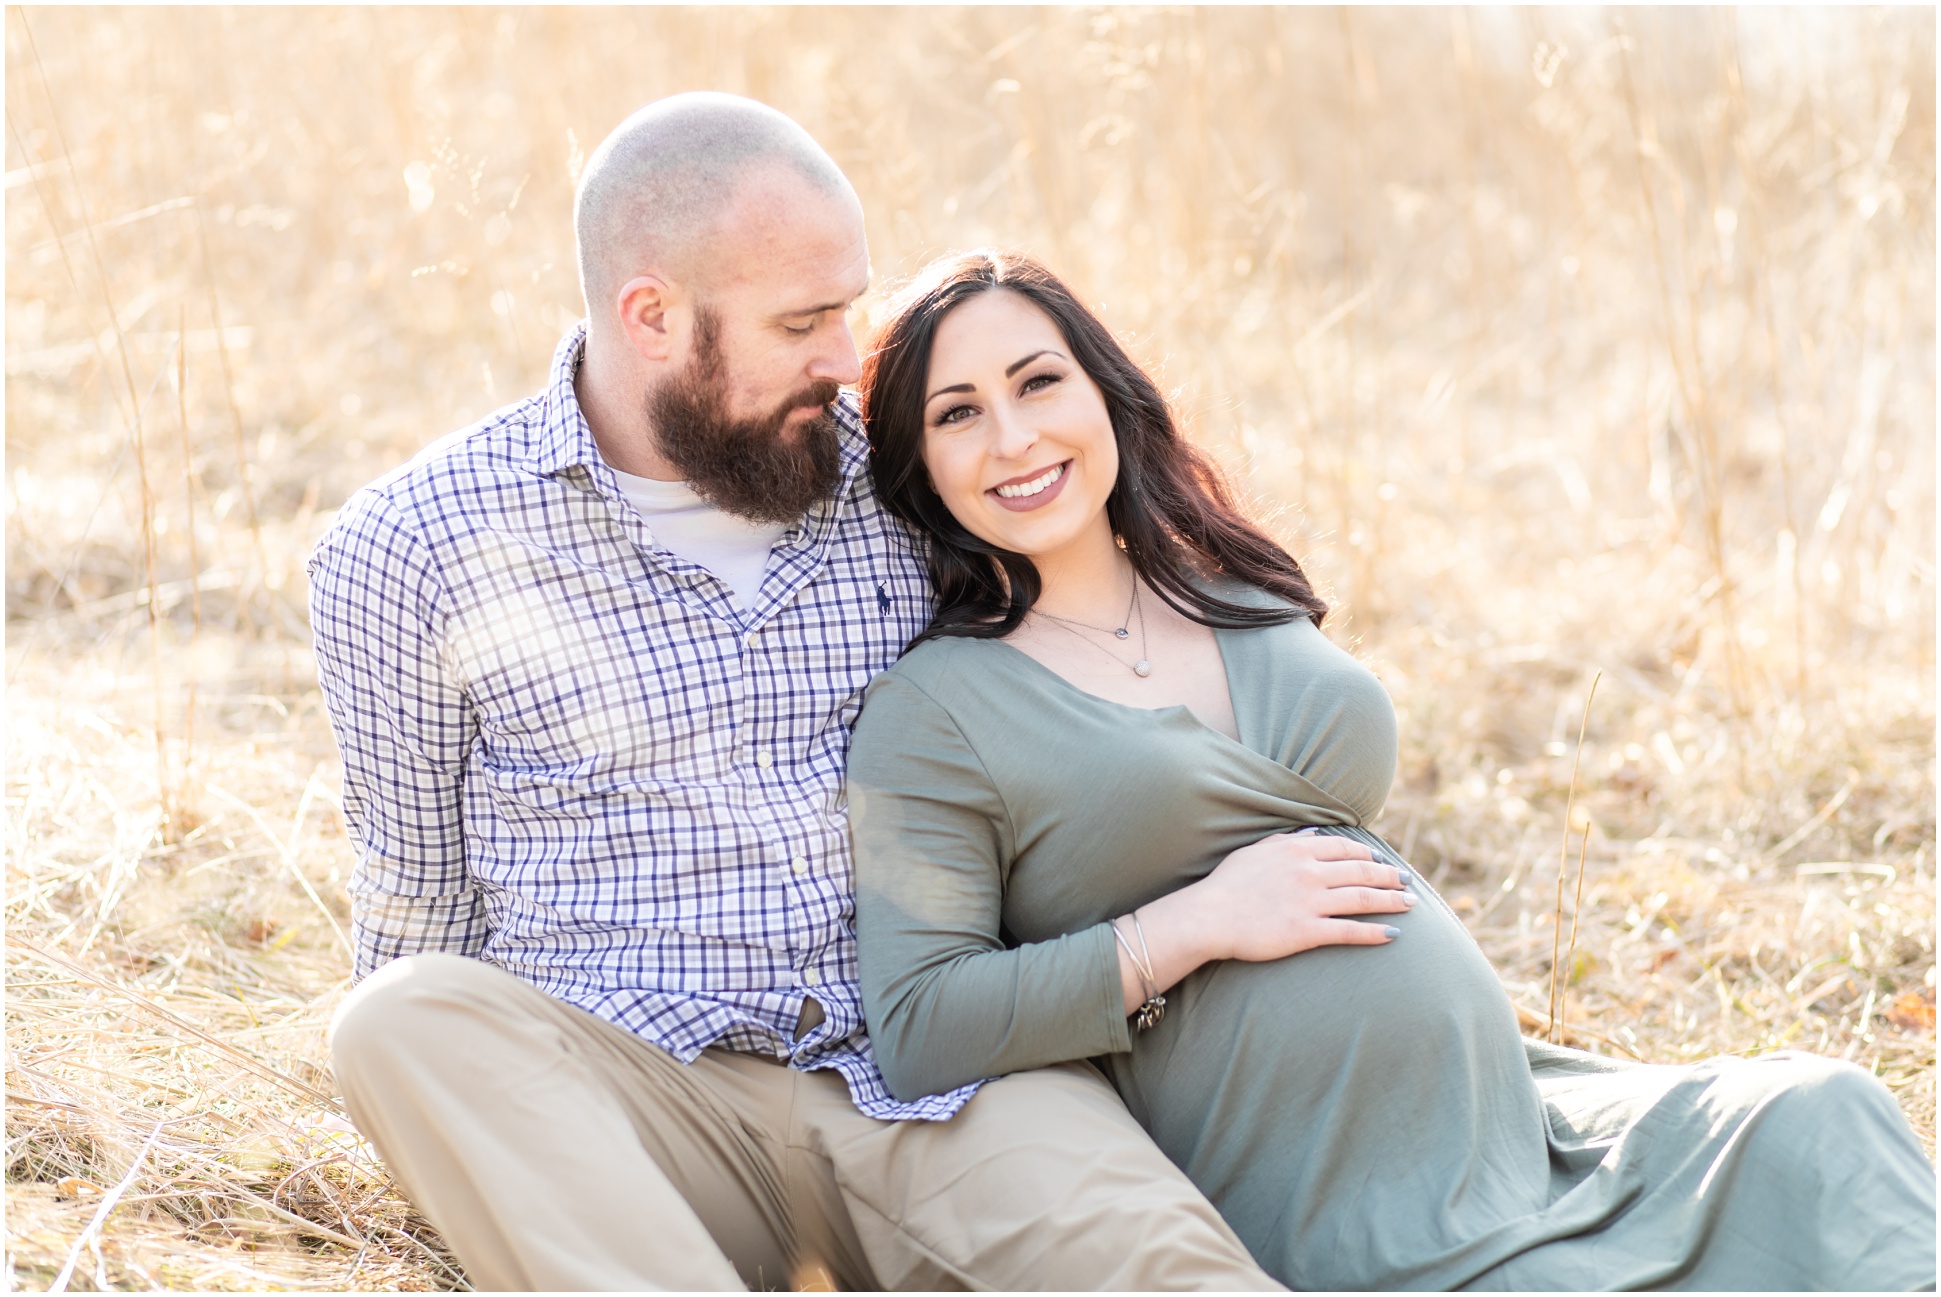 Husband and Wife sitting in the golden grass showing off their baby bump.